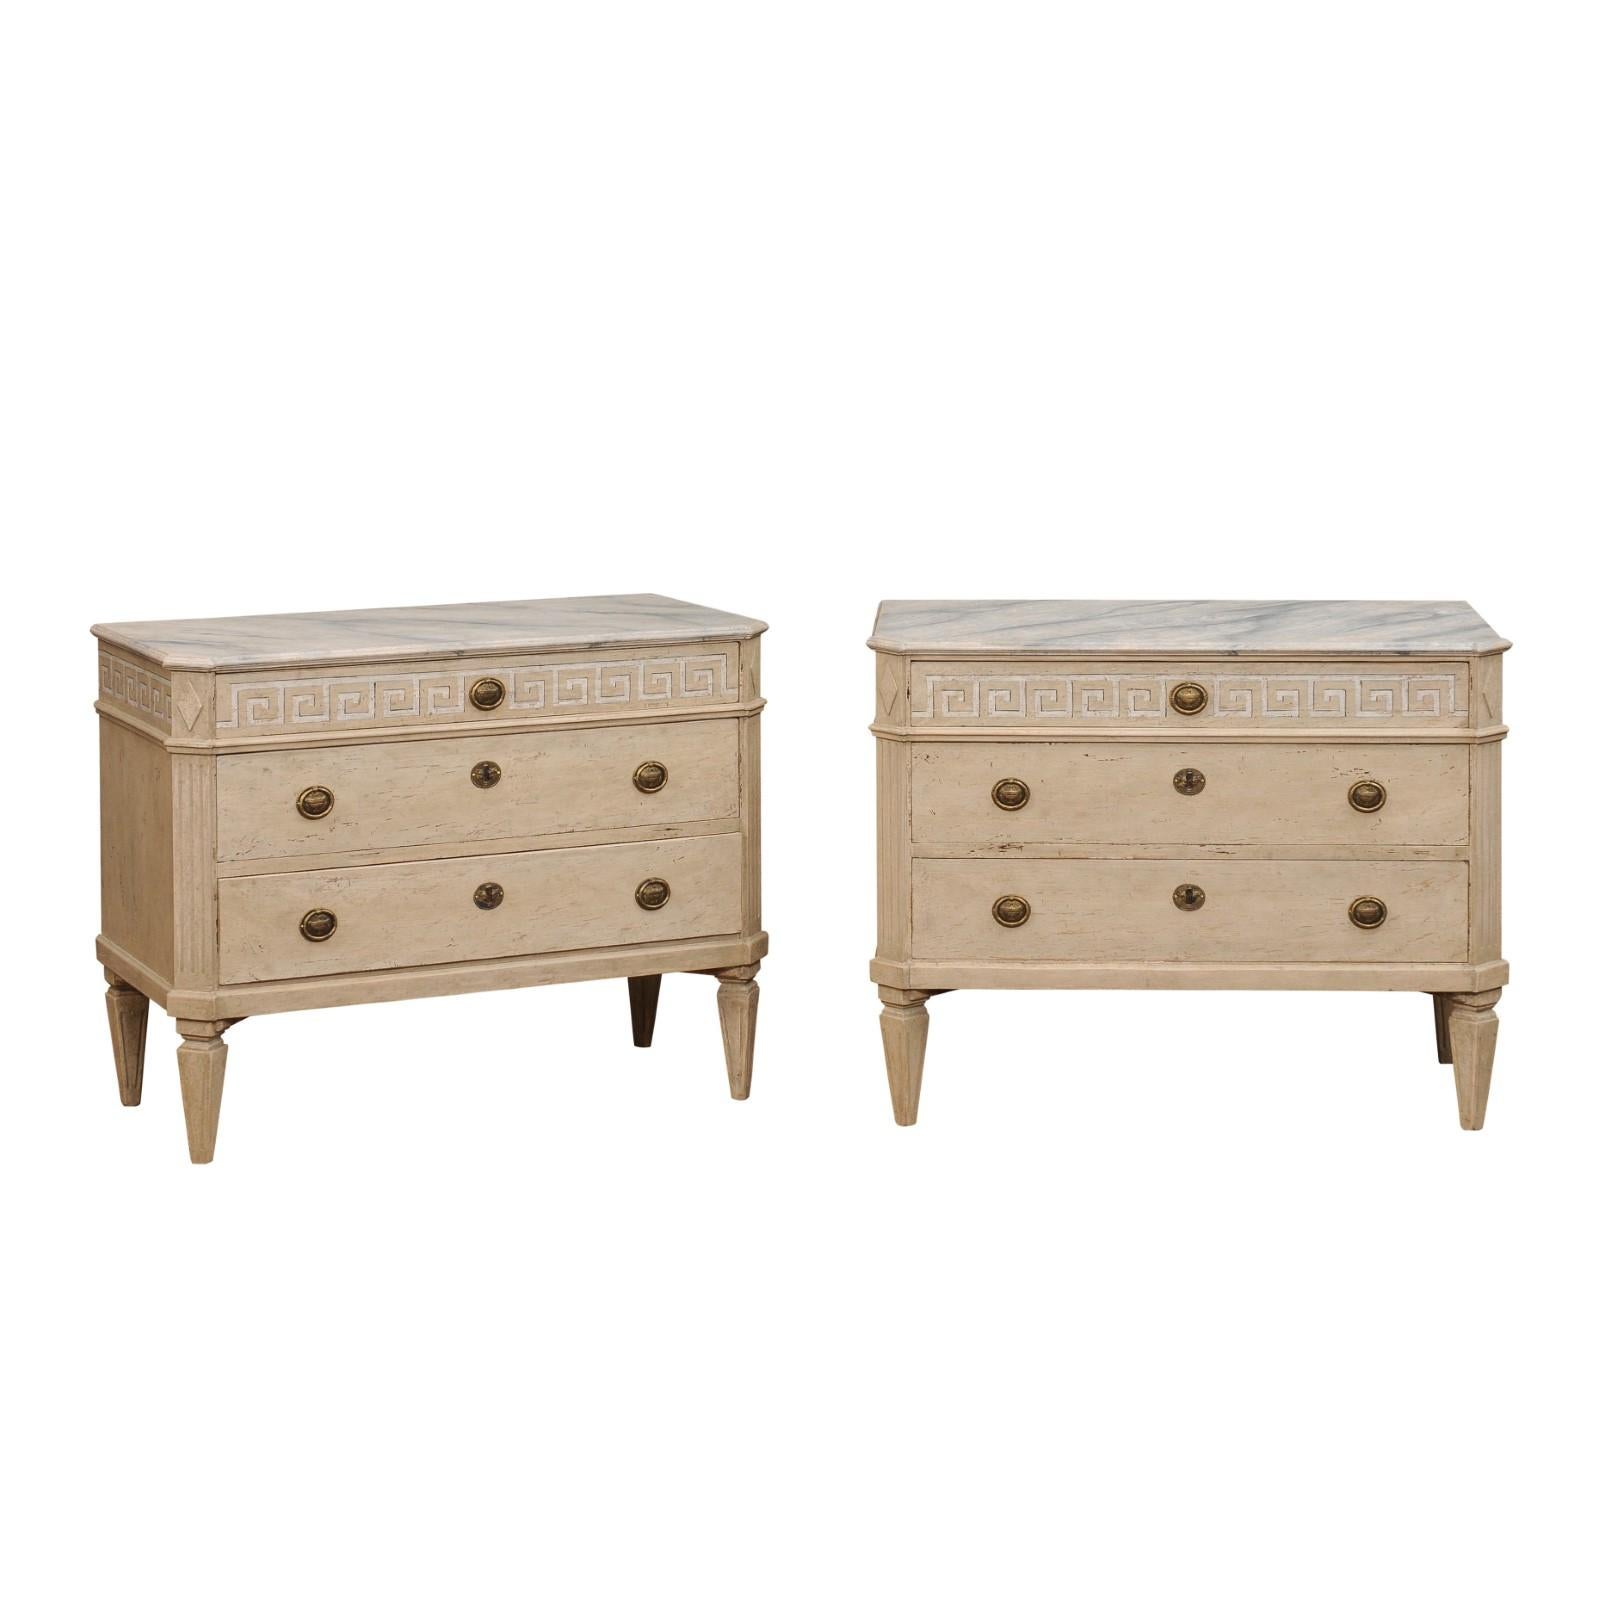 A pair of Swedish Neoclassical style chests from the 19th century with marbleized tops, painted Greek Key friezes and three drawers each. Indulge in the timeless allure of Swedish design with this pair of 19th-century Neoclassical-style painted wood